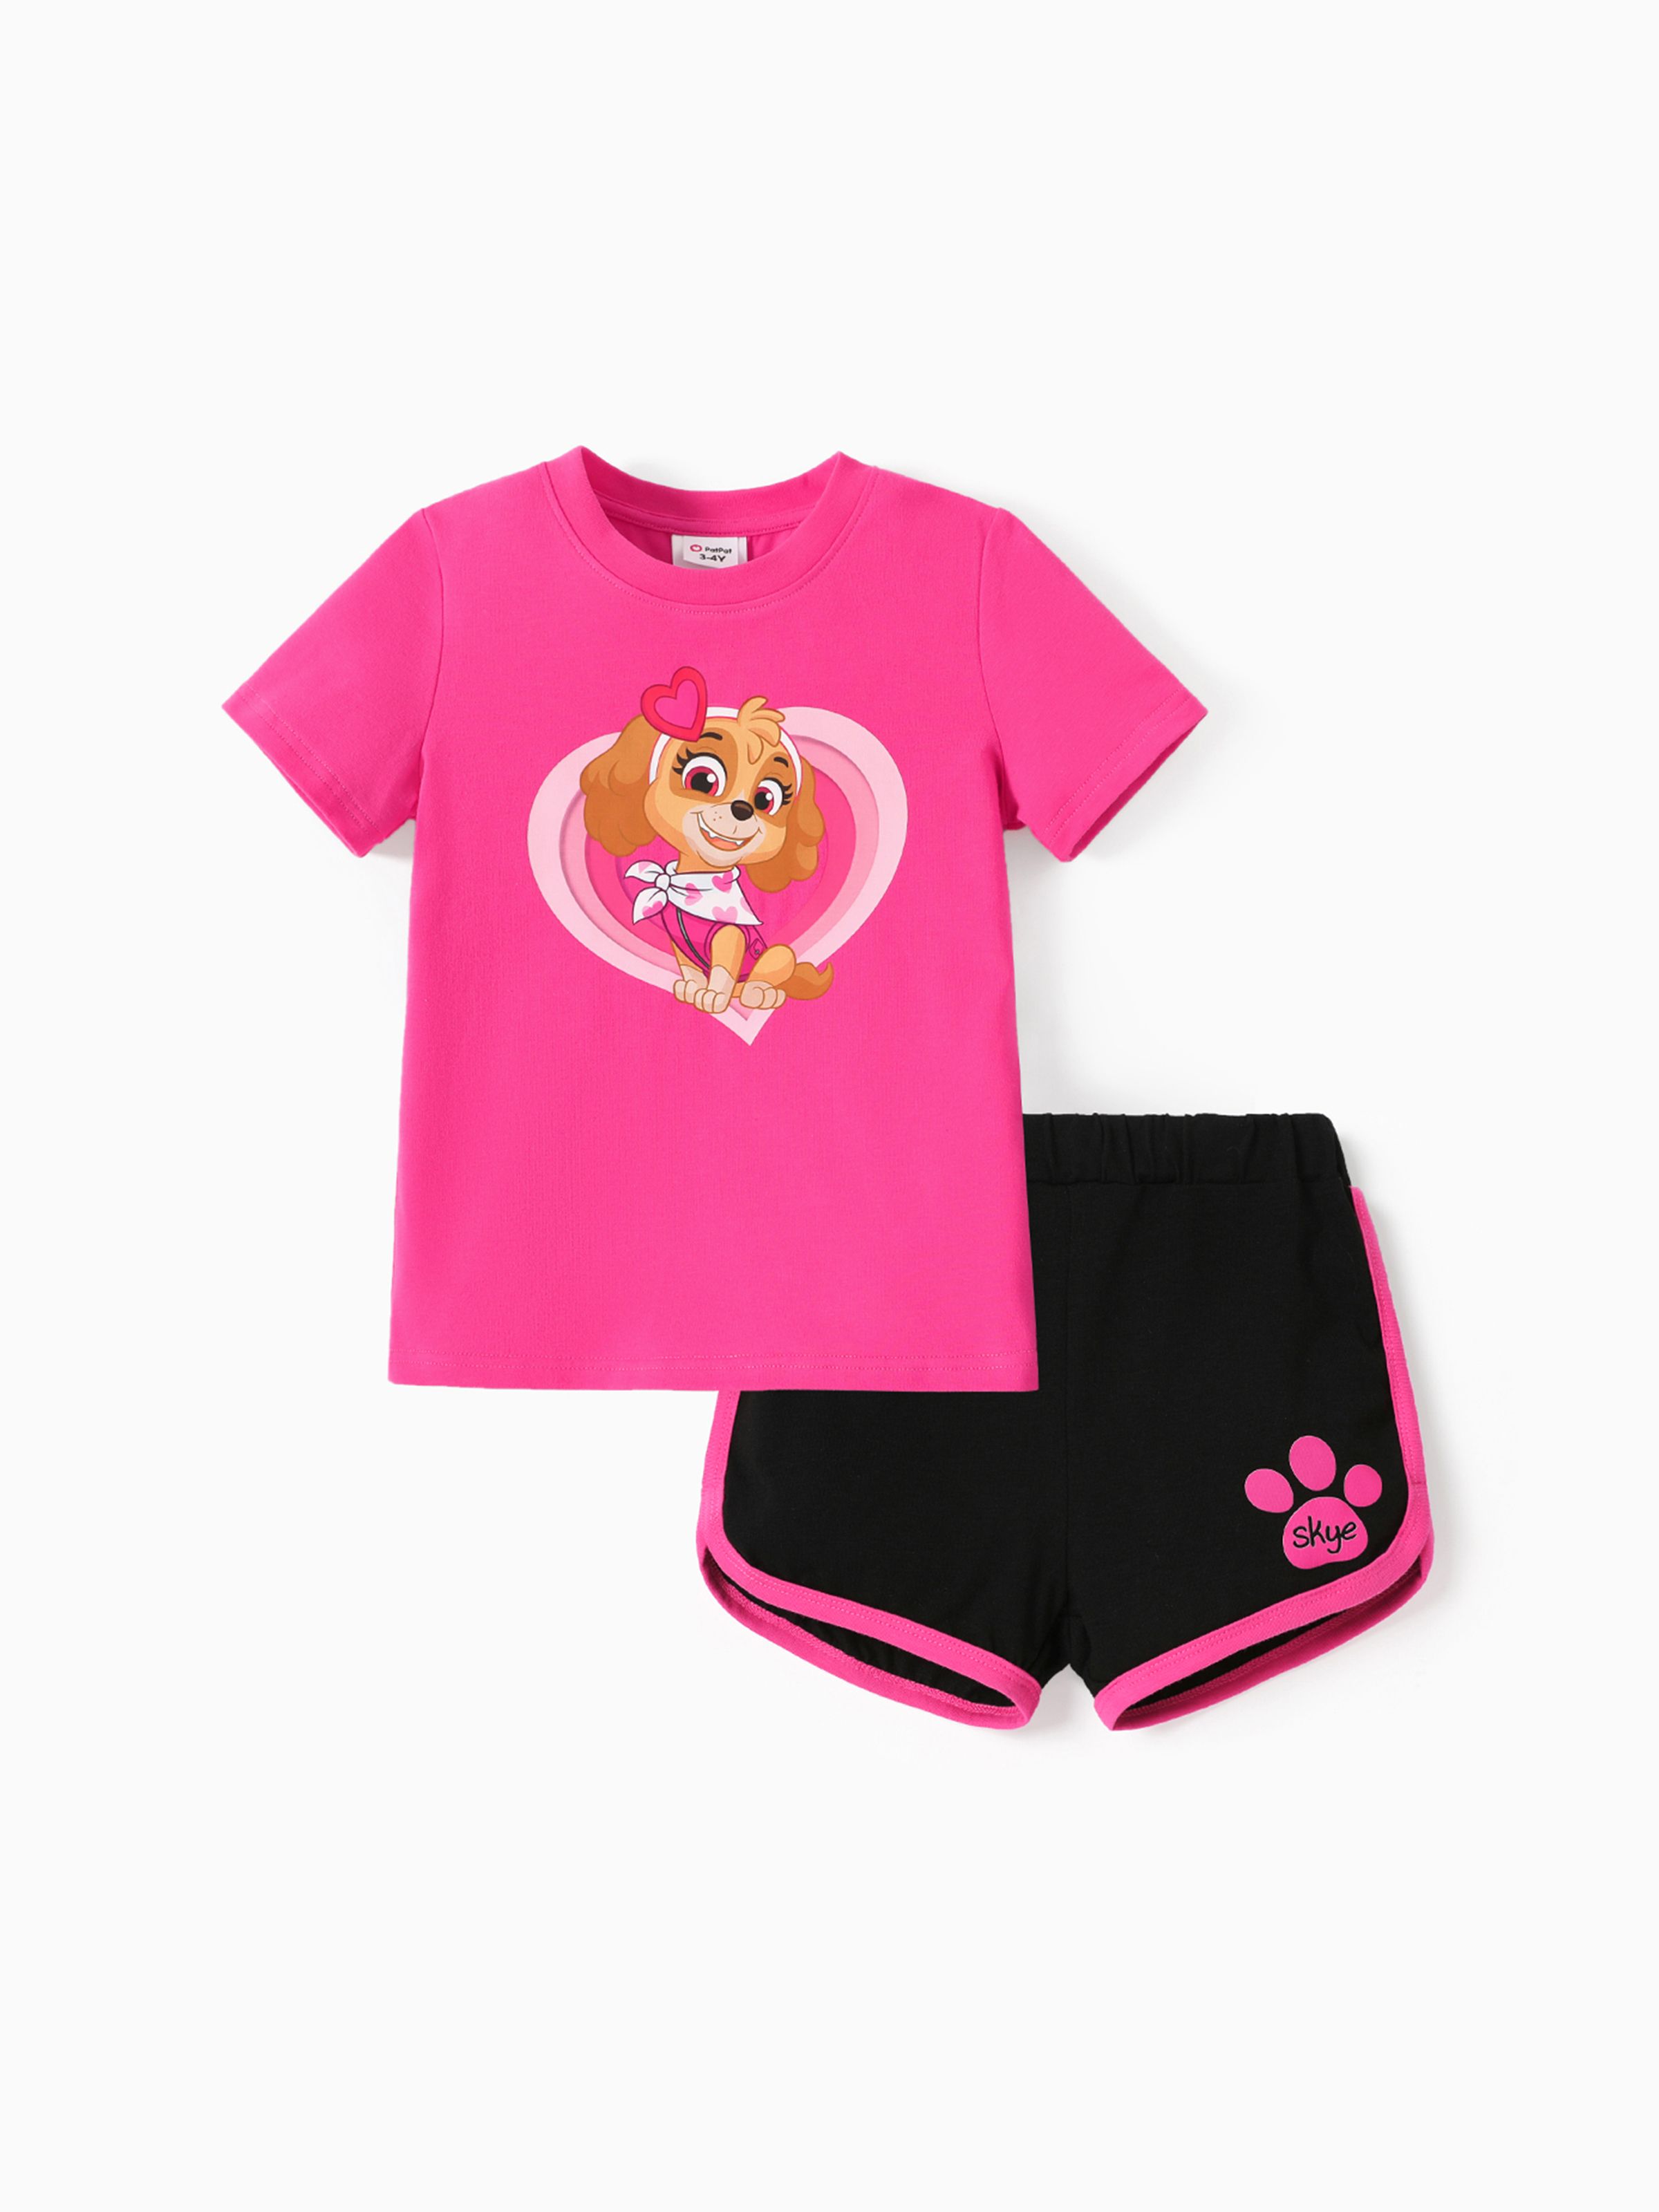 

PAW Patrol Toddler Girl 2pcs Mother's Day Heart Print Short-sleeve Cotton Tee and Shorts Set